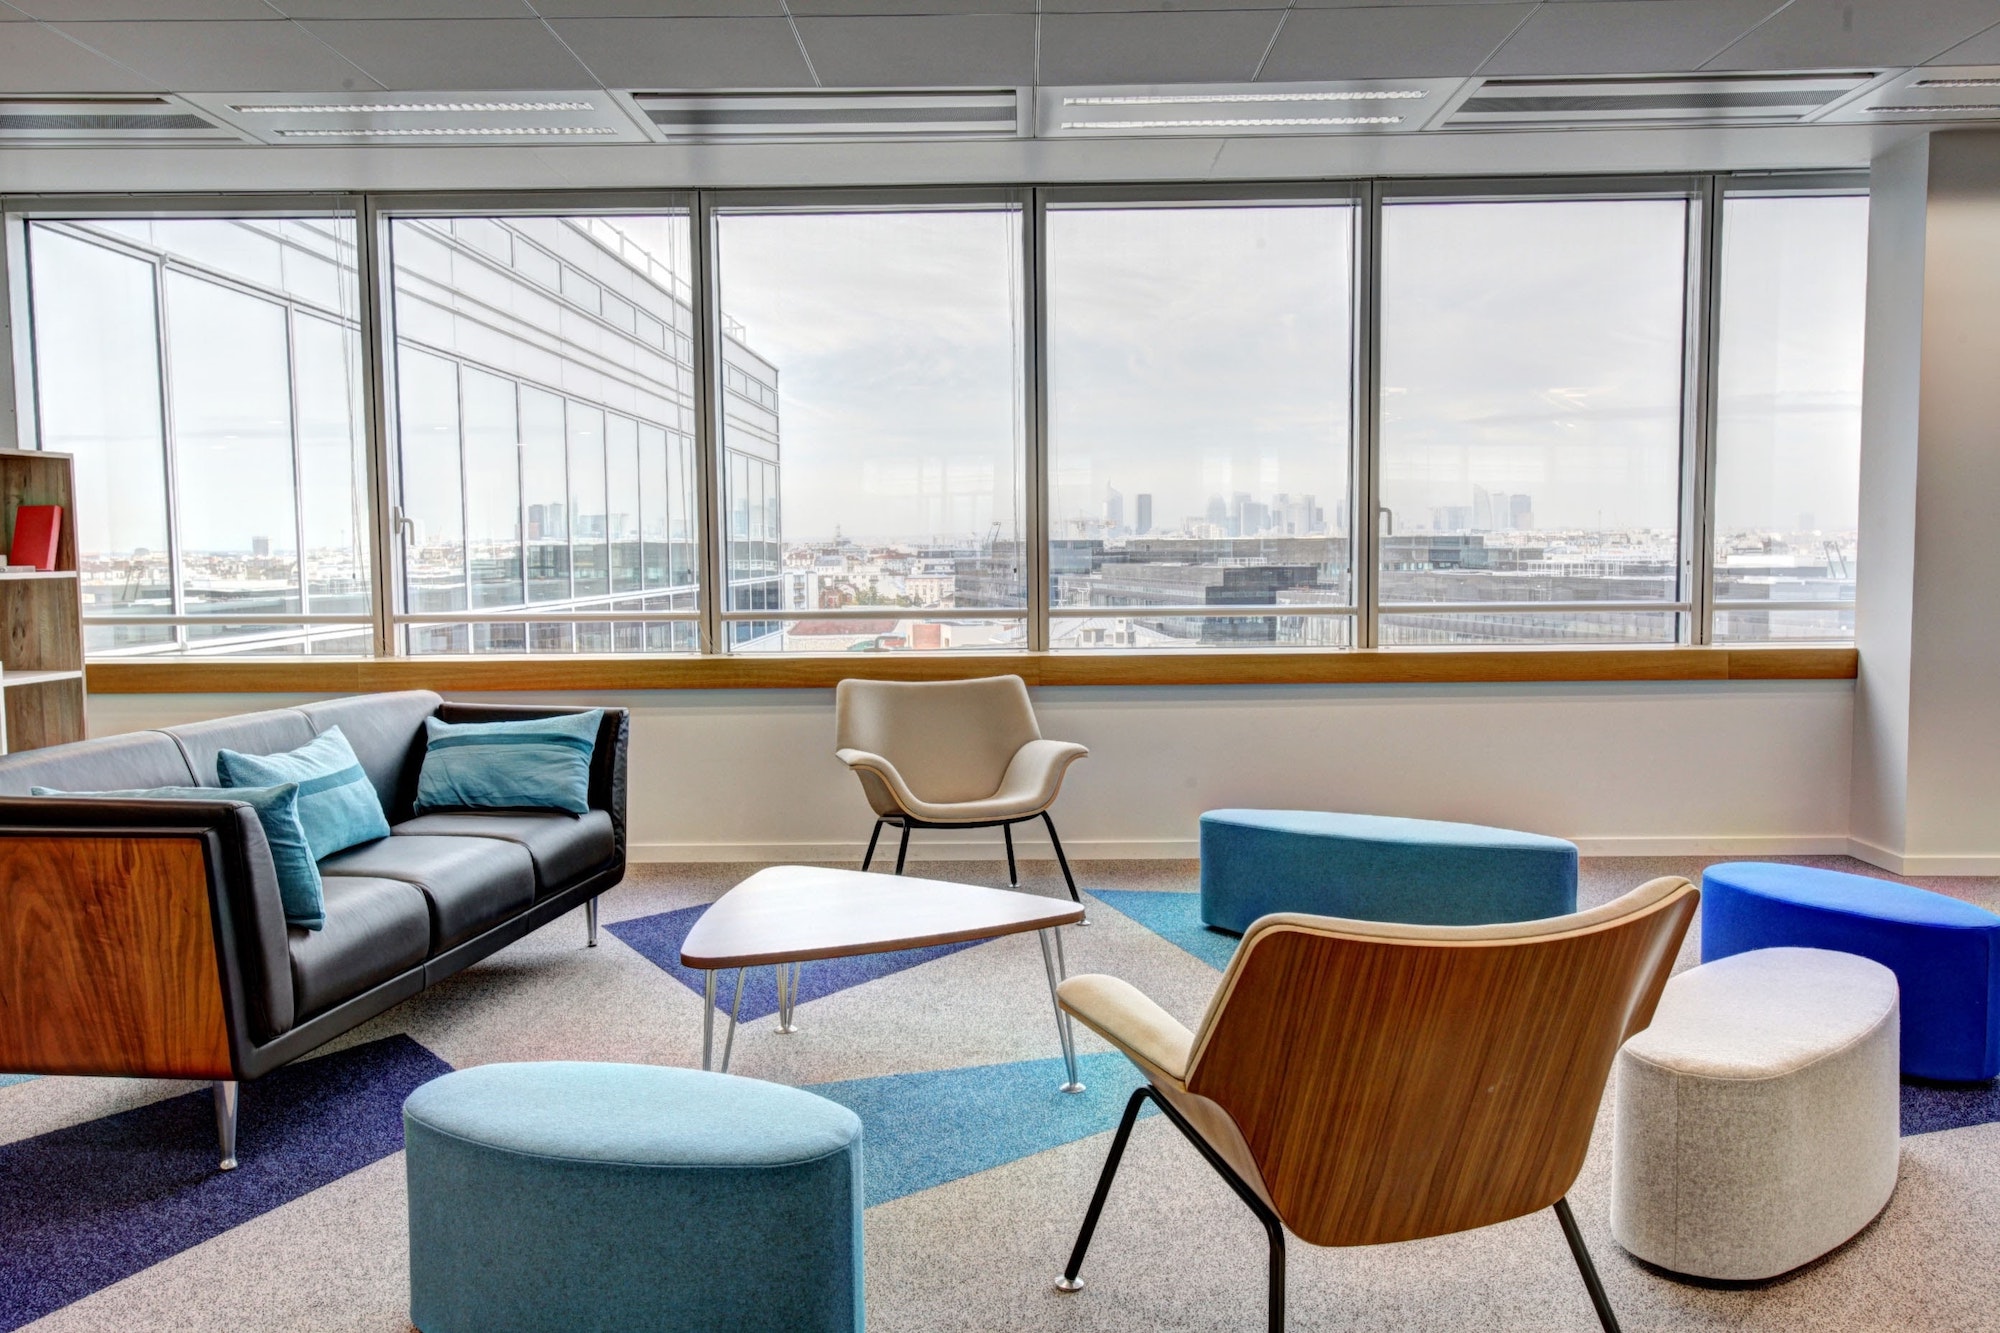 empty chairs arrayed around a modern coffee table in a vacant conference room with a city view through windows in the background